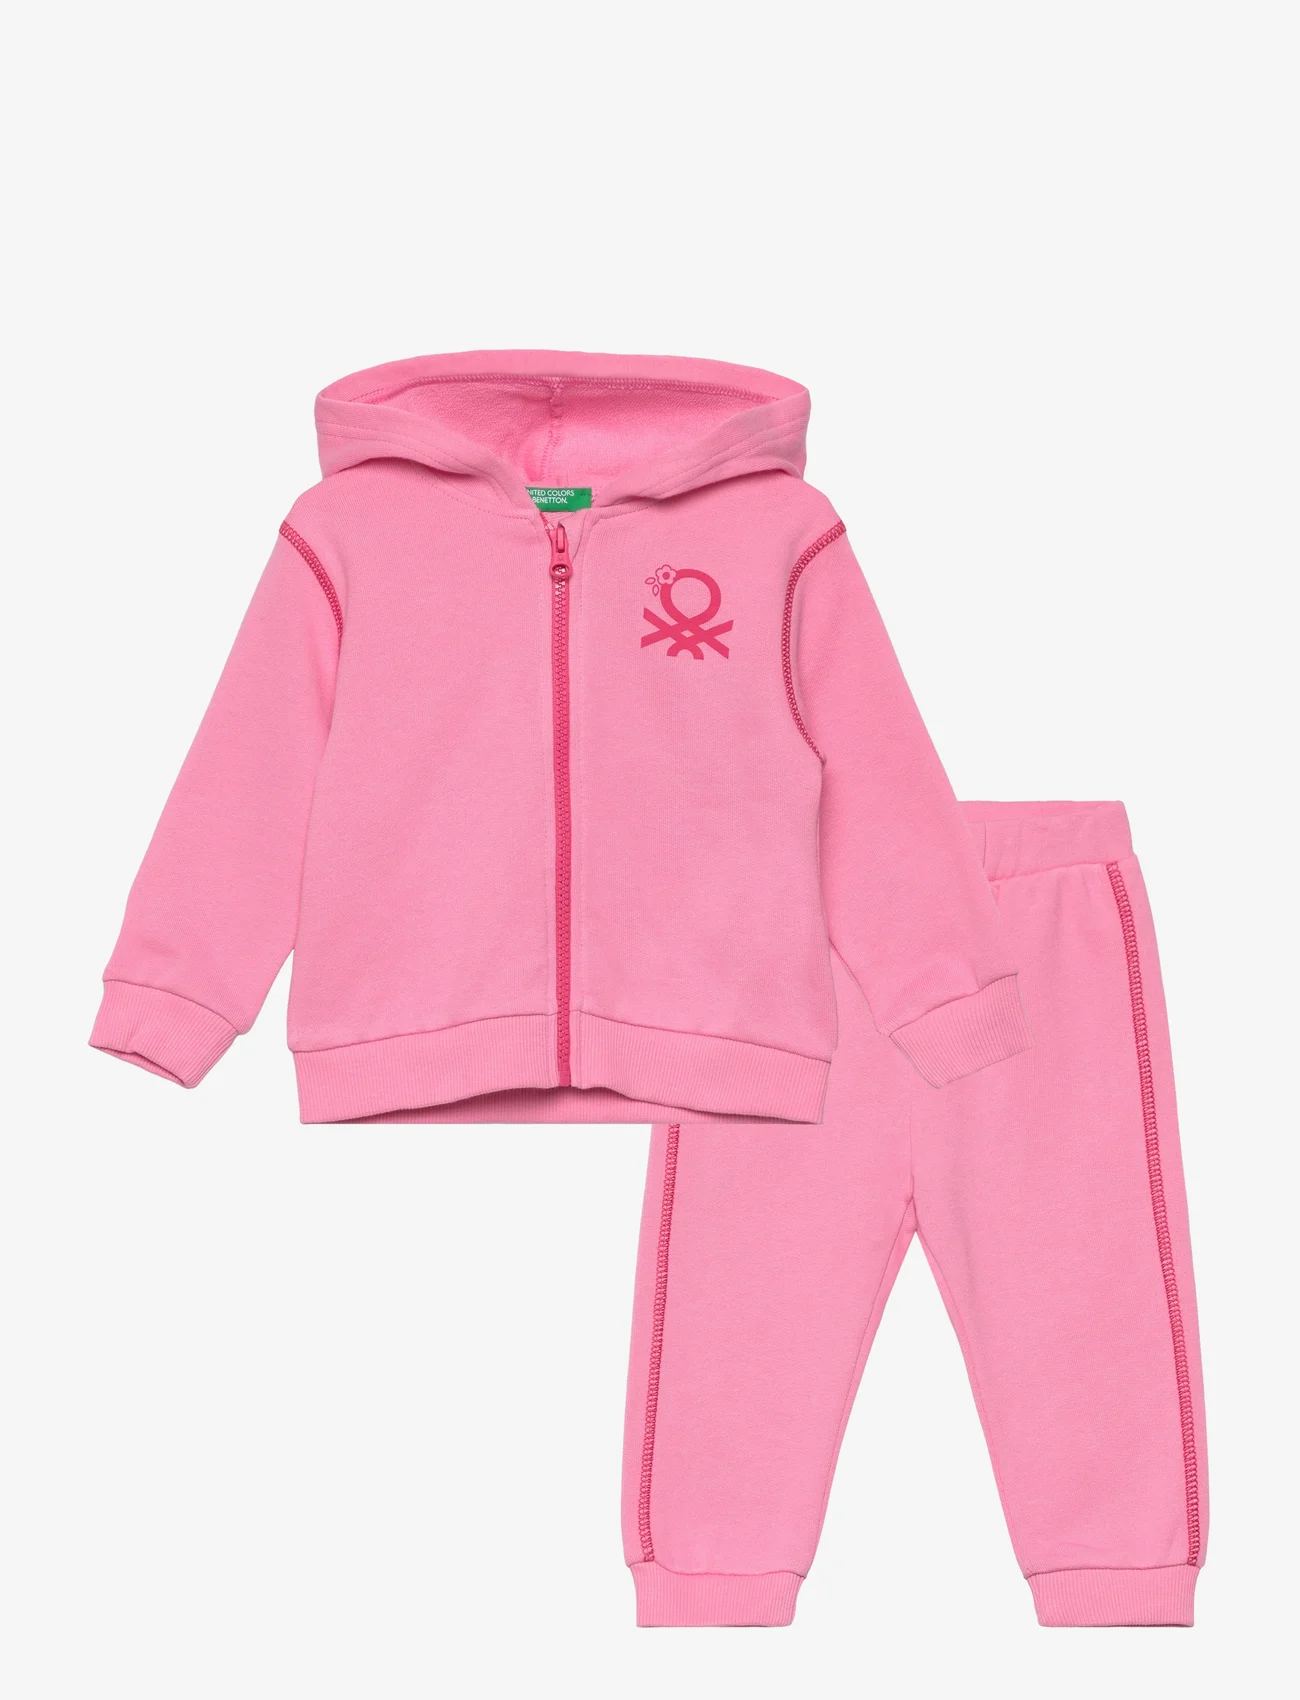 United Colors of Benetton - SET JACKET+TROUSERS - träningsoveraller - pink - 0